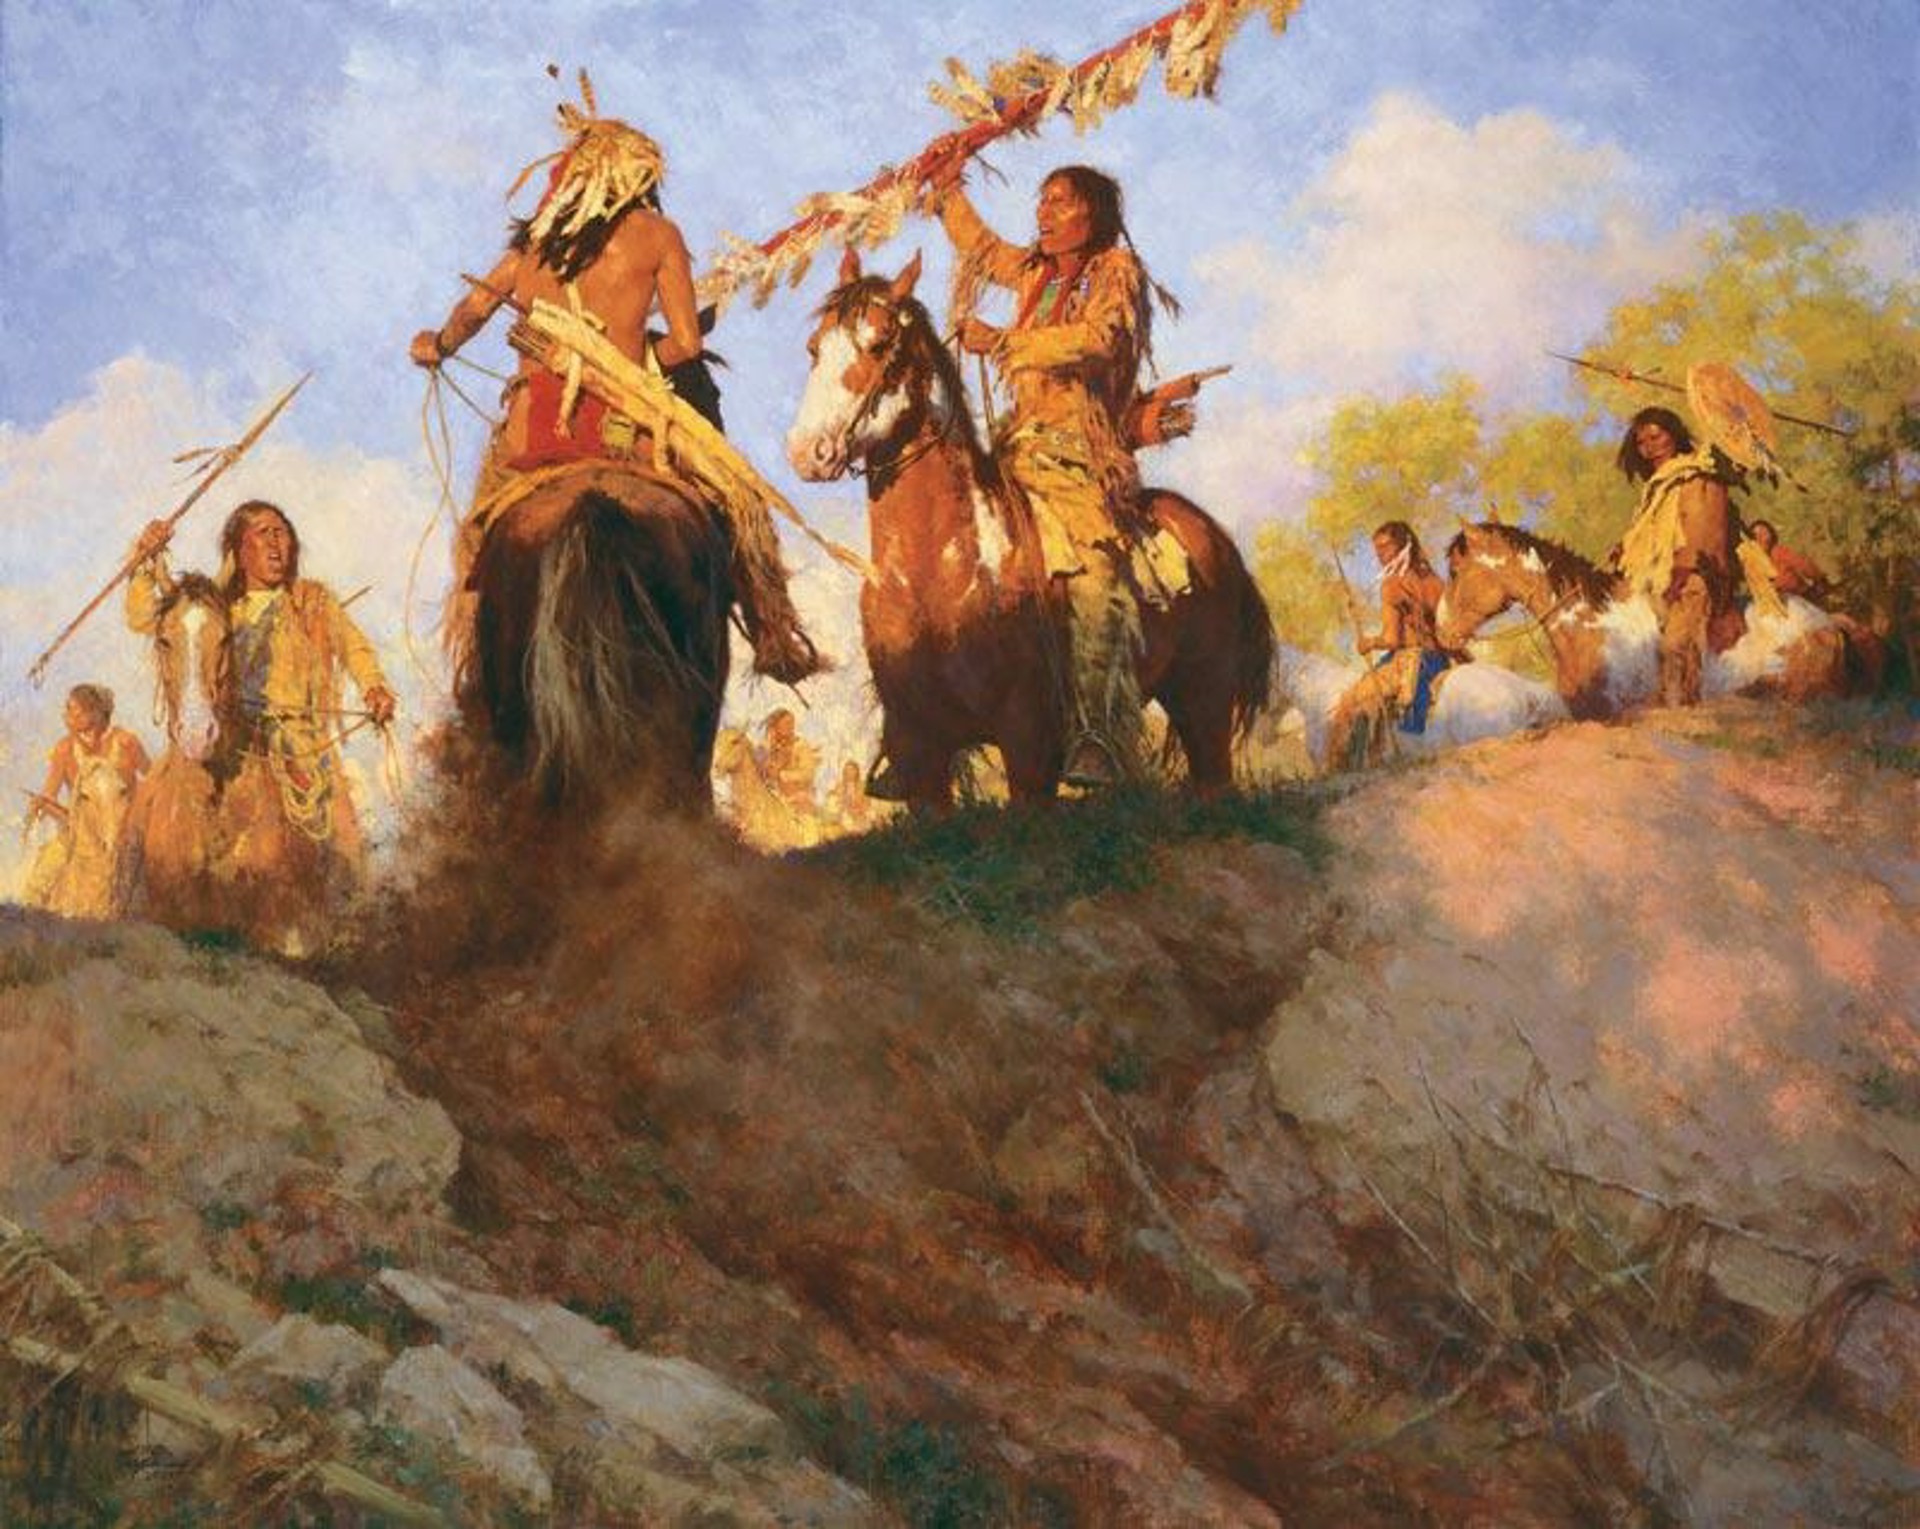 Sunset For The Comanche by Howard Terpning